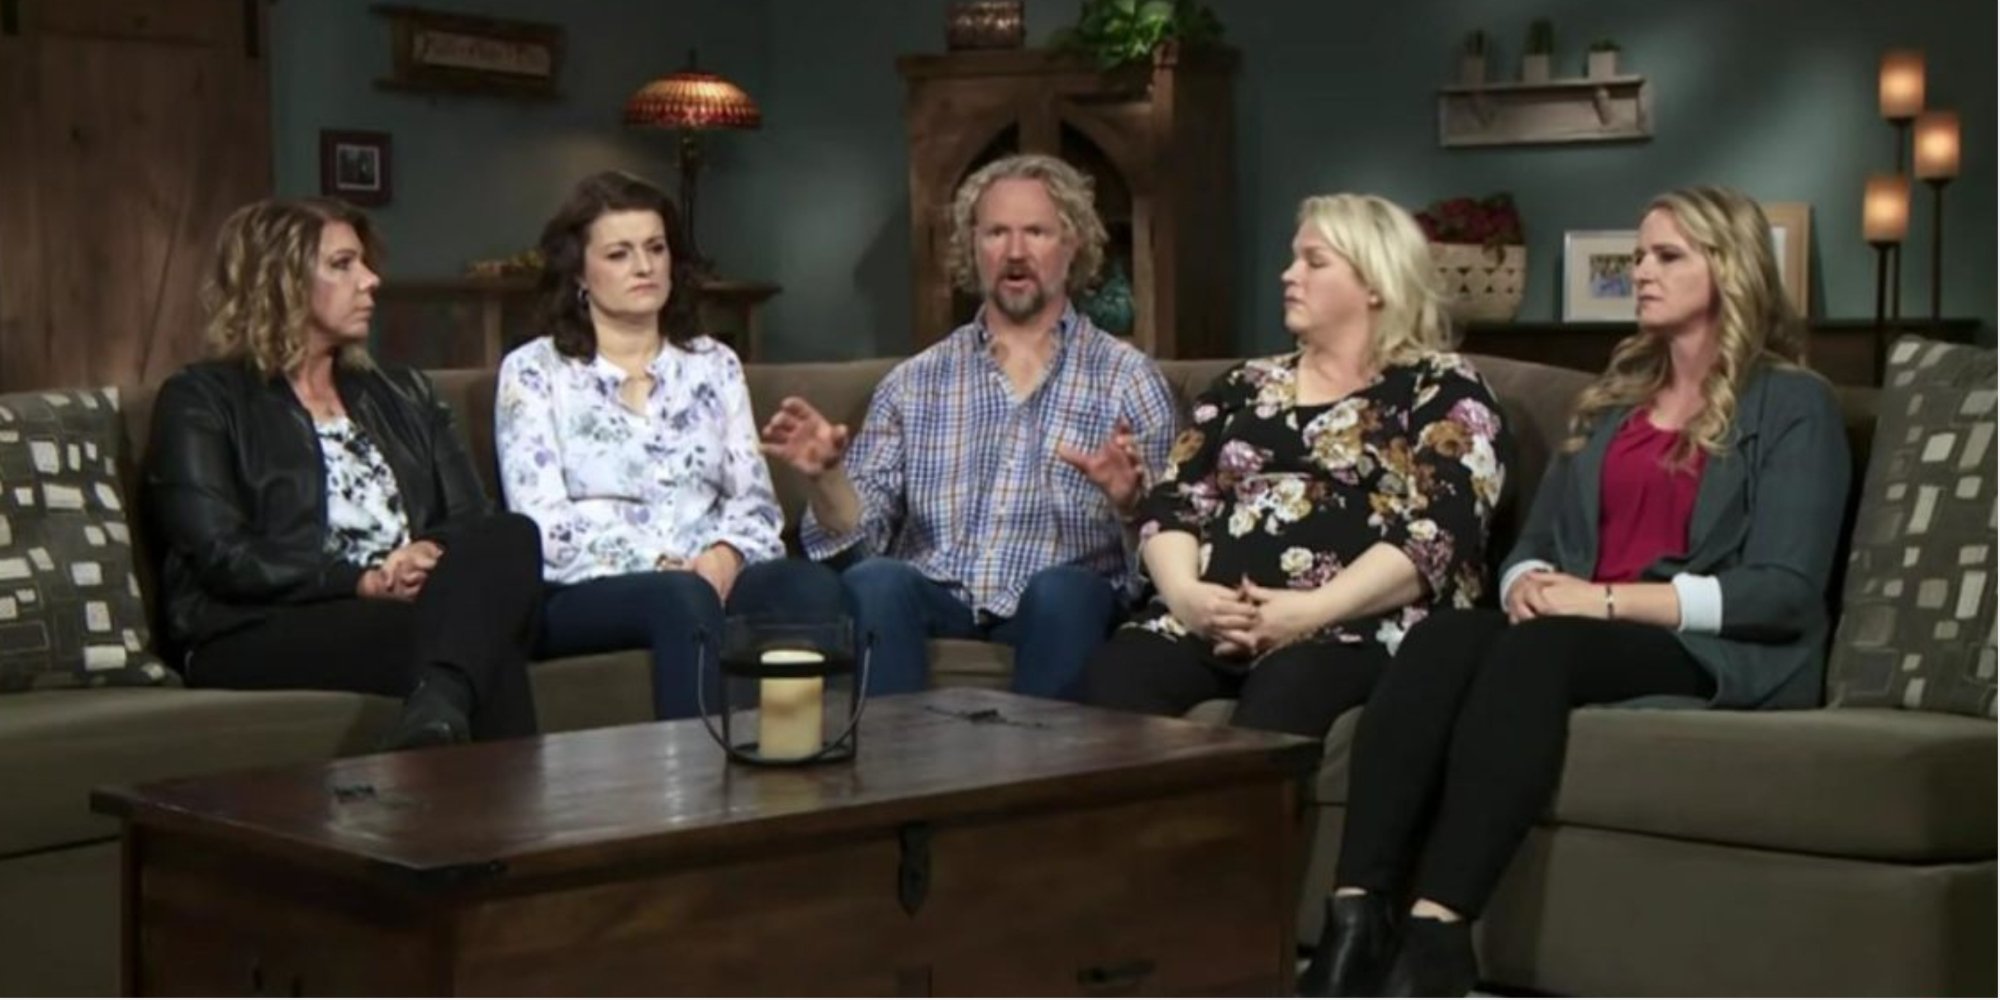 TLC's 'Sister Wives' stars Meri, Robyn, Kody, Janelle, and Christine Brown.